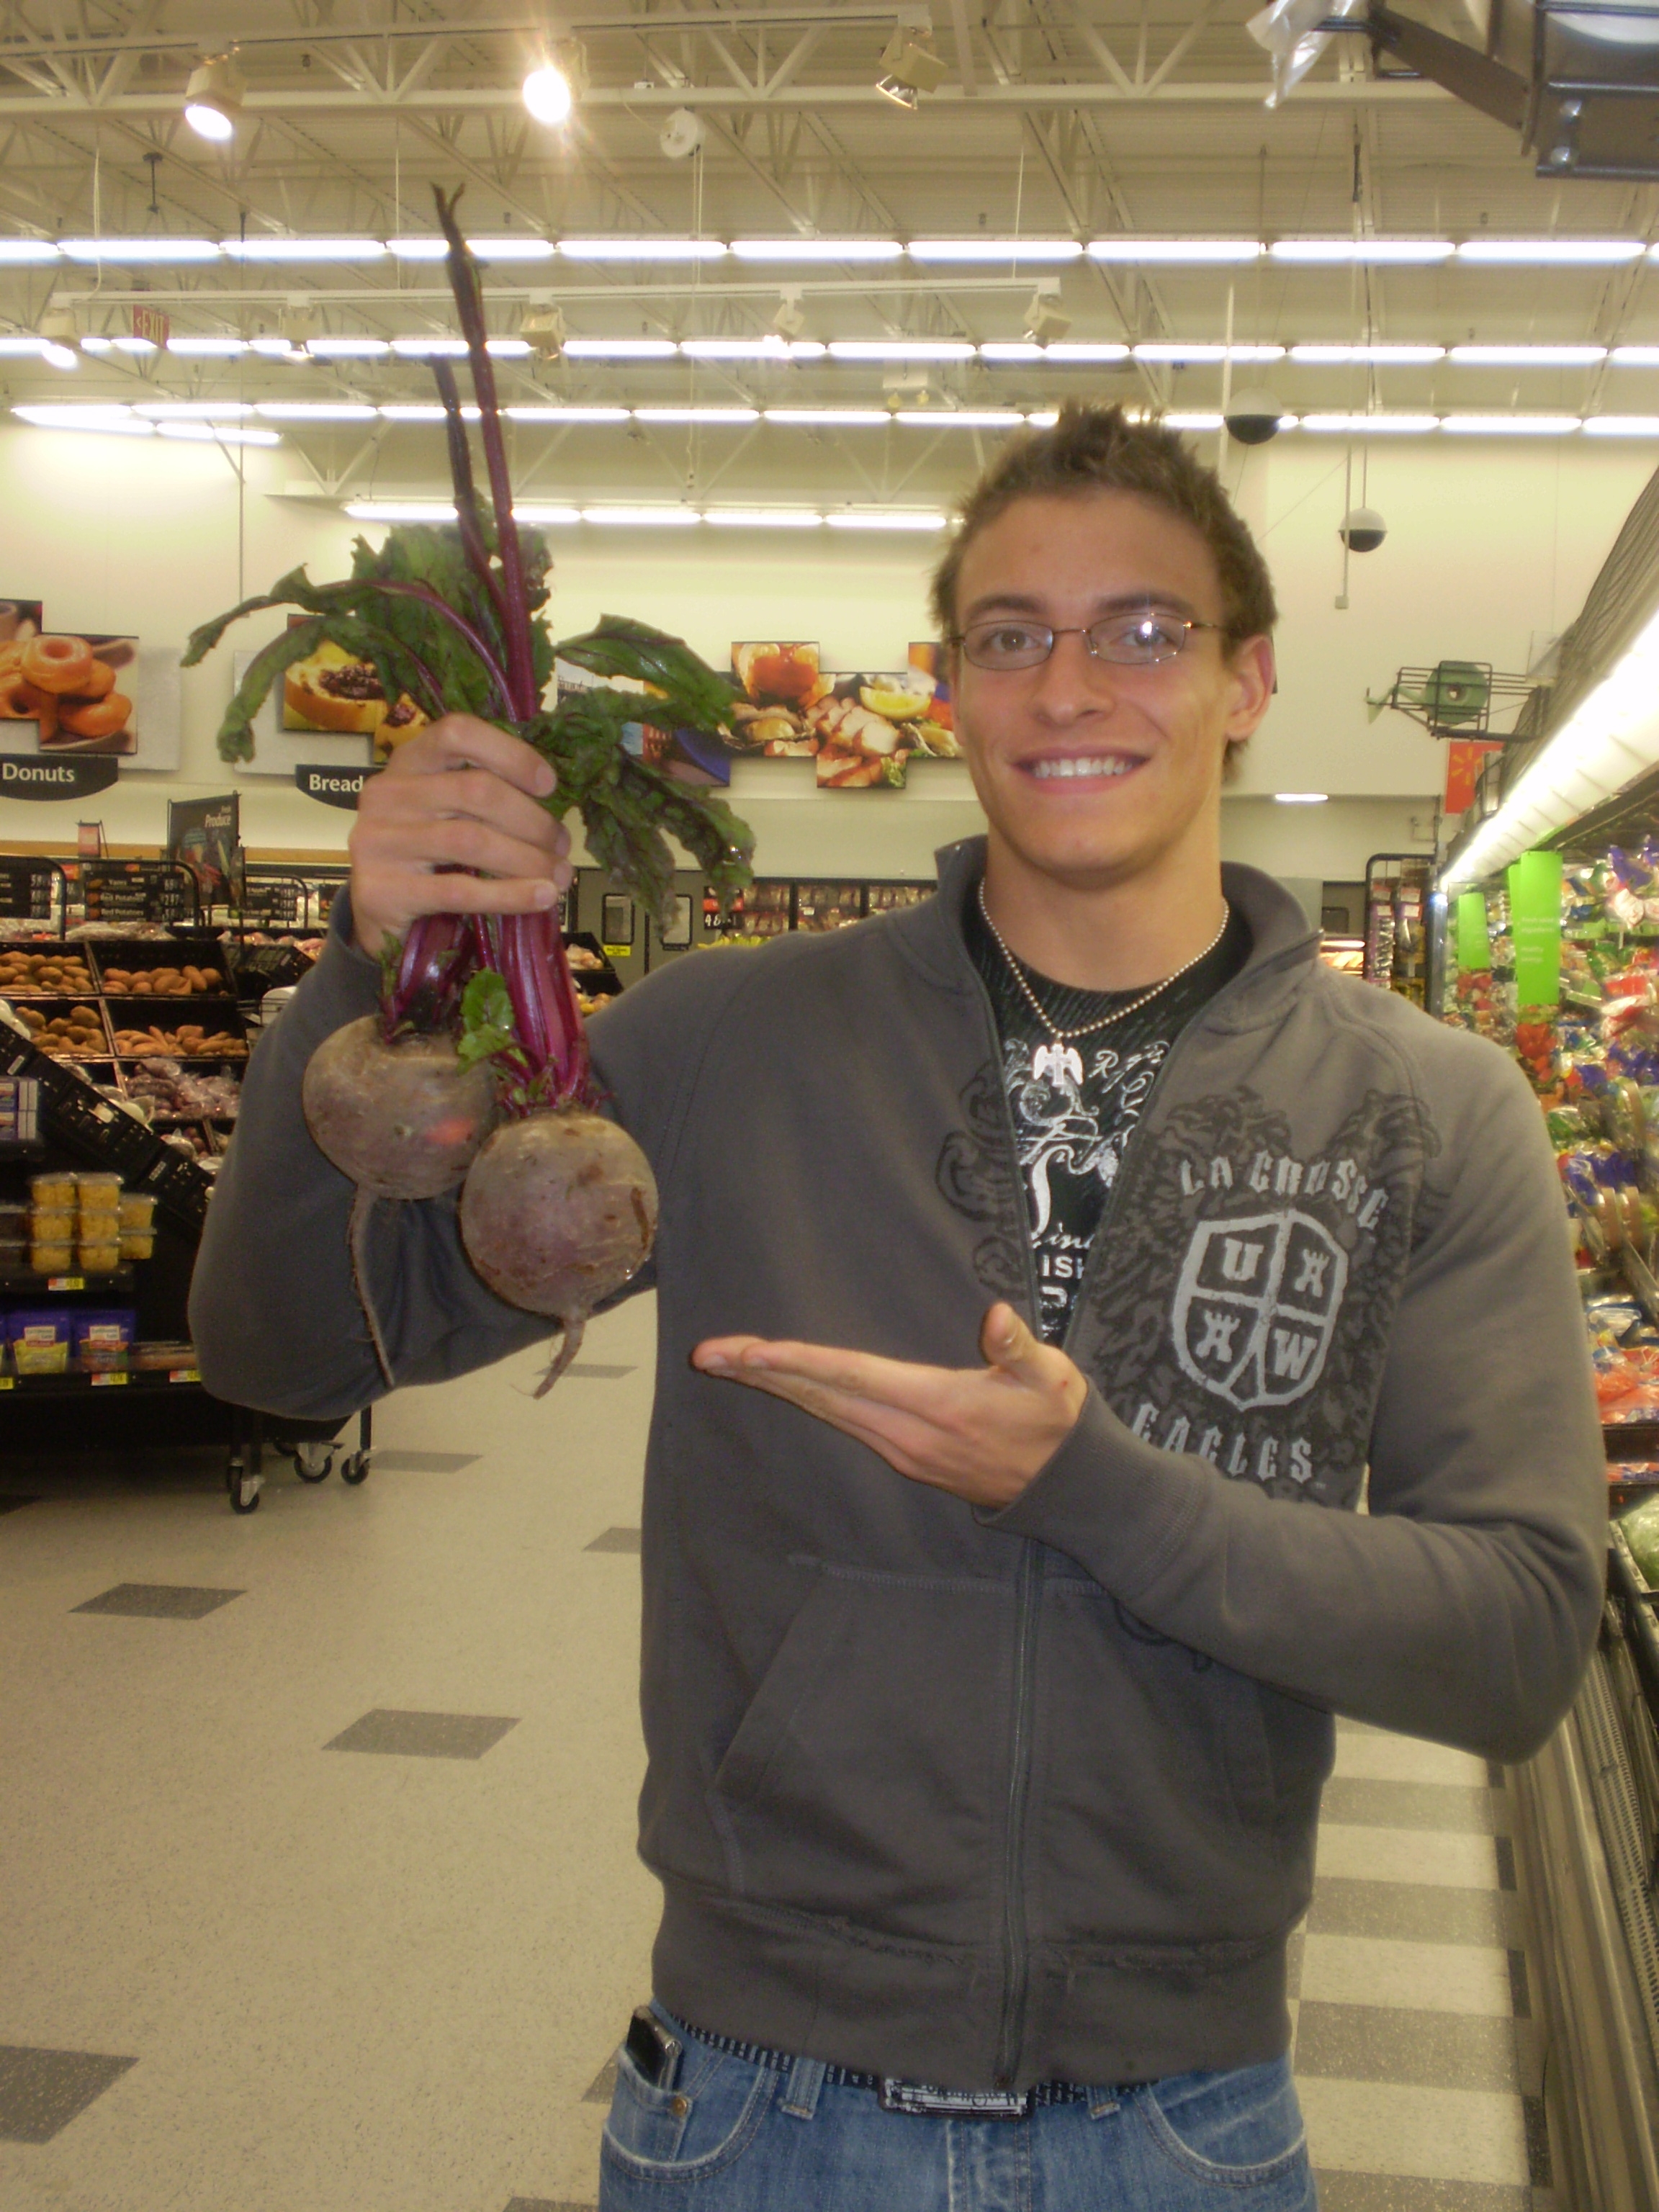 Me and a turnip from wal mart